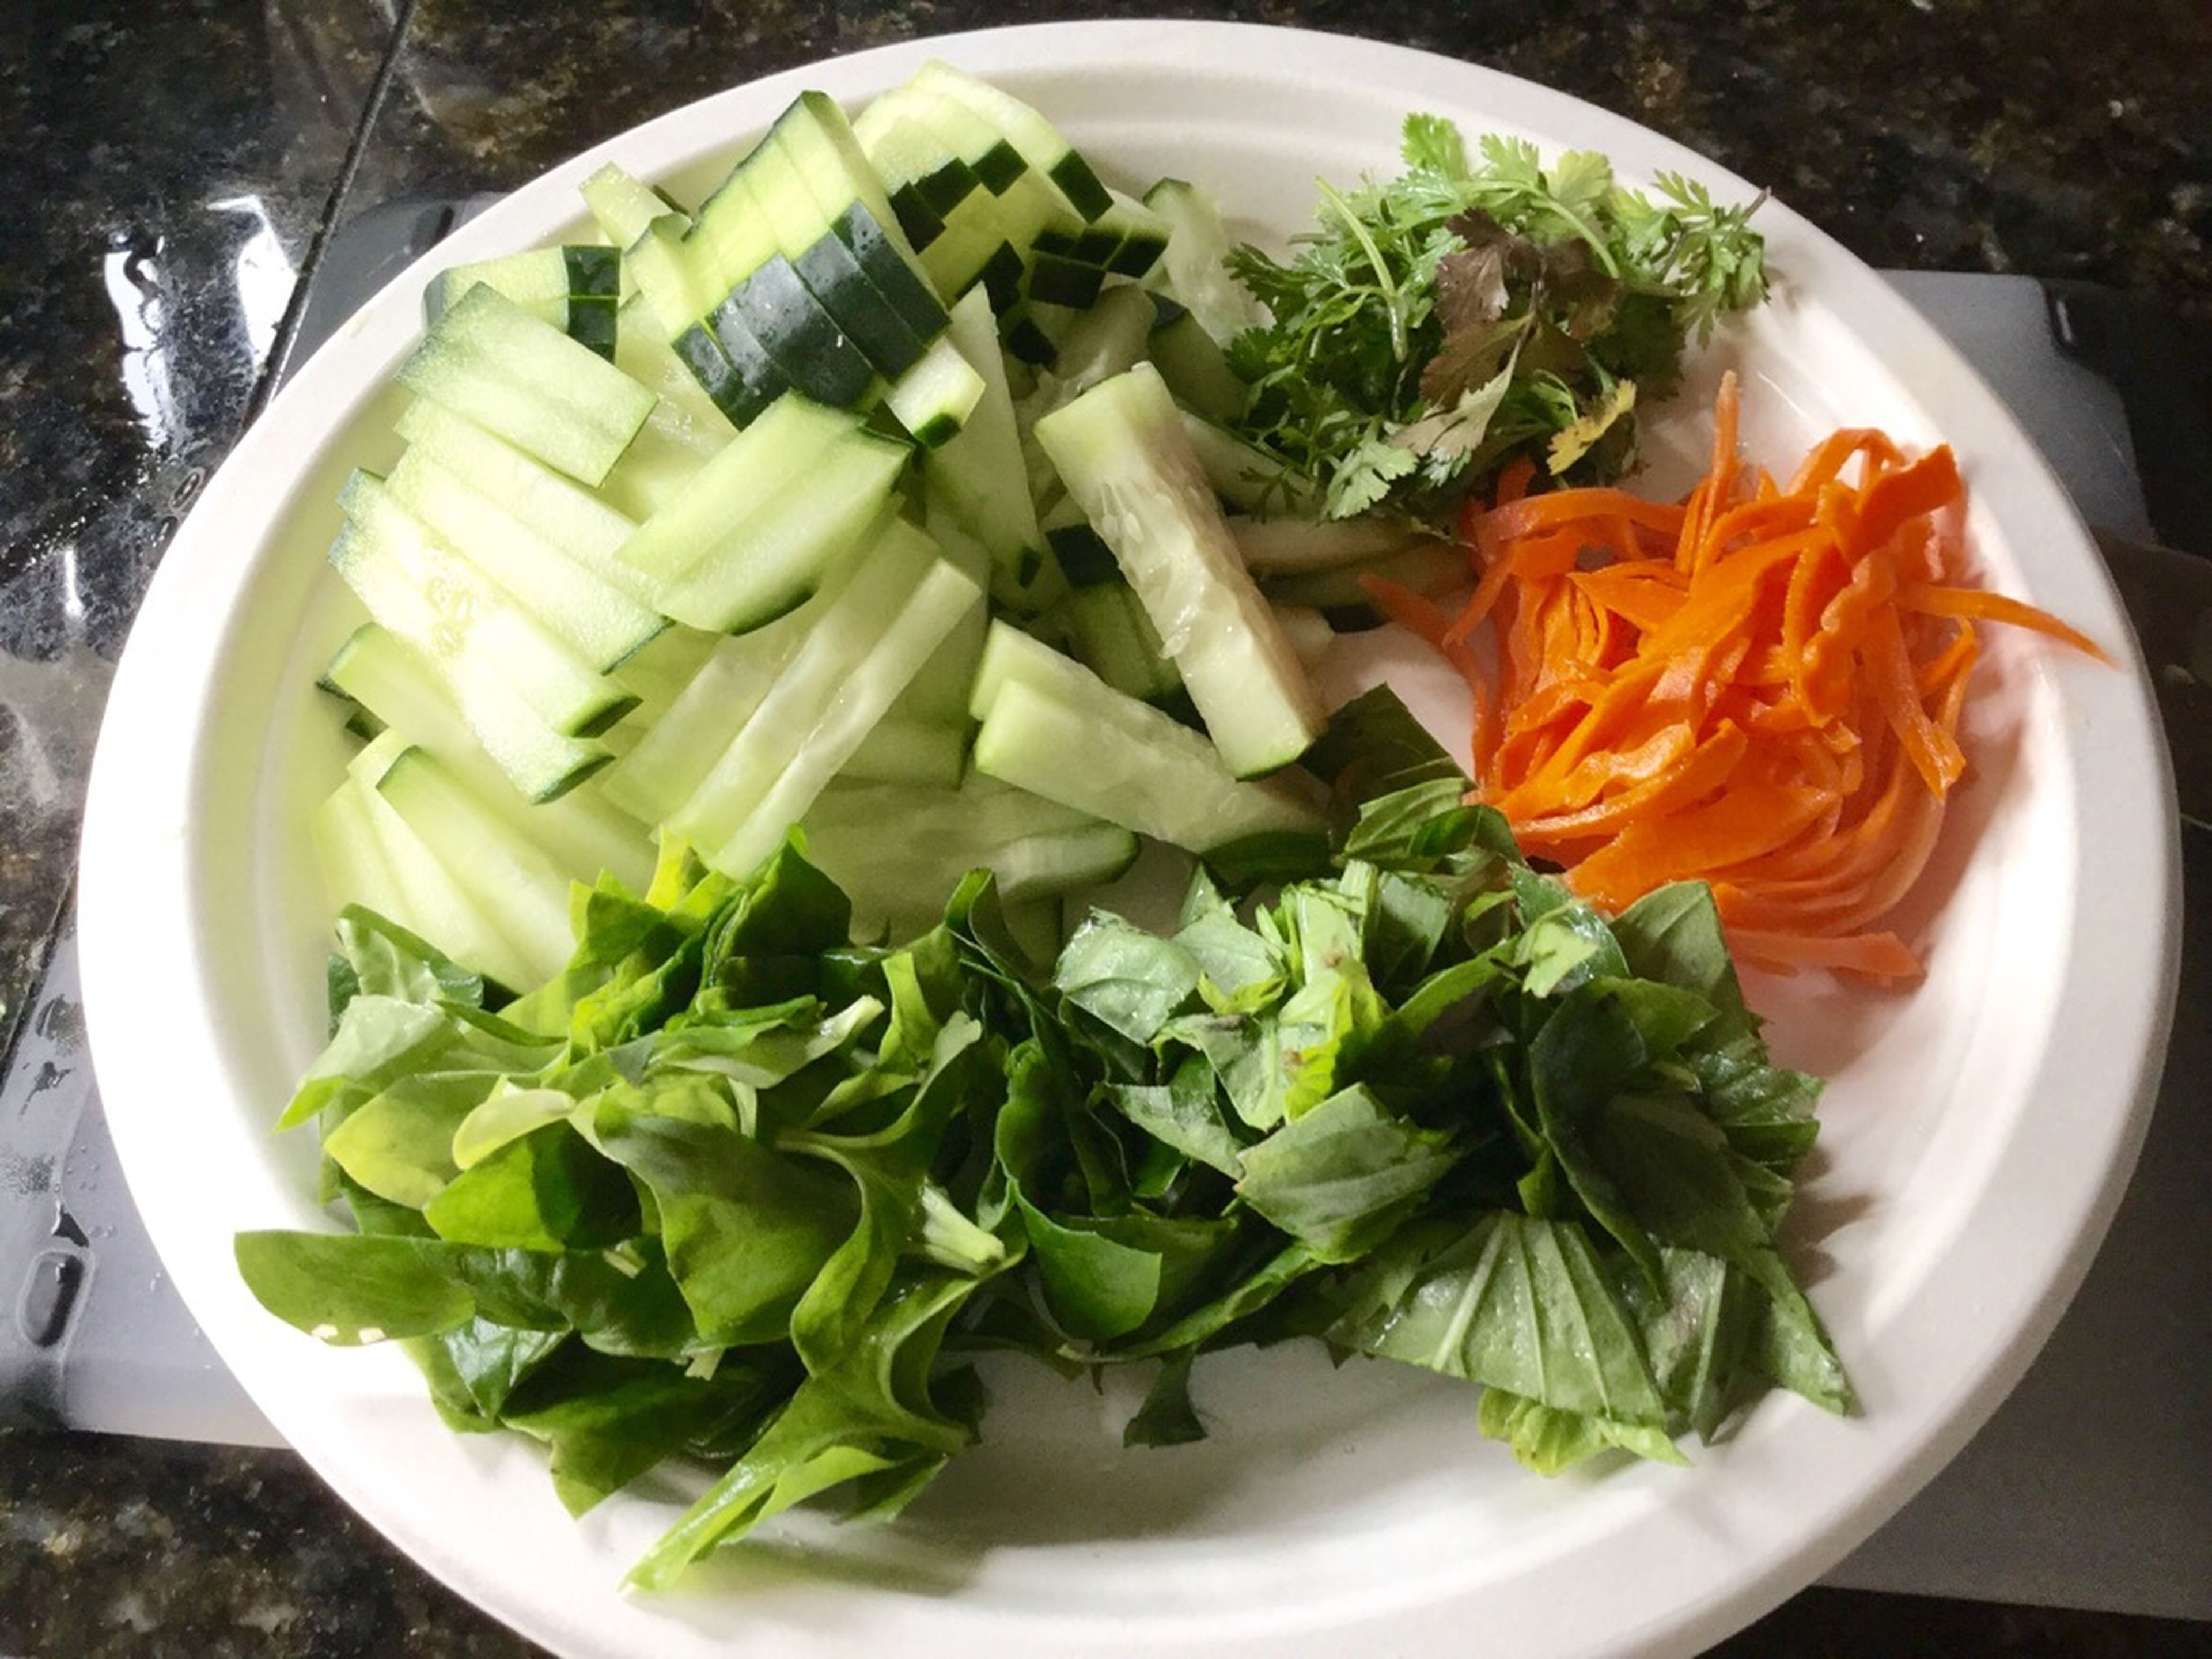 Drain the carrots and chop cucumber, Thai basil, lettuce, and cilantro and set aside. Chop scallions. Heat vegetable oil in a frying pan over medium-high heat and sauté scallions for approx. 2 min.